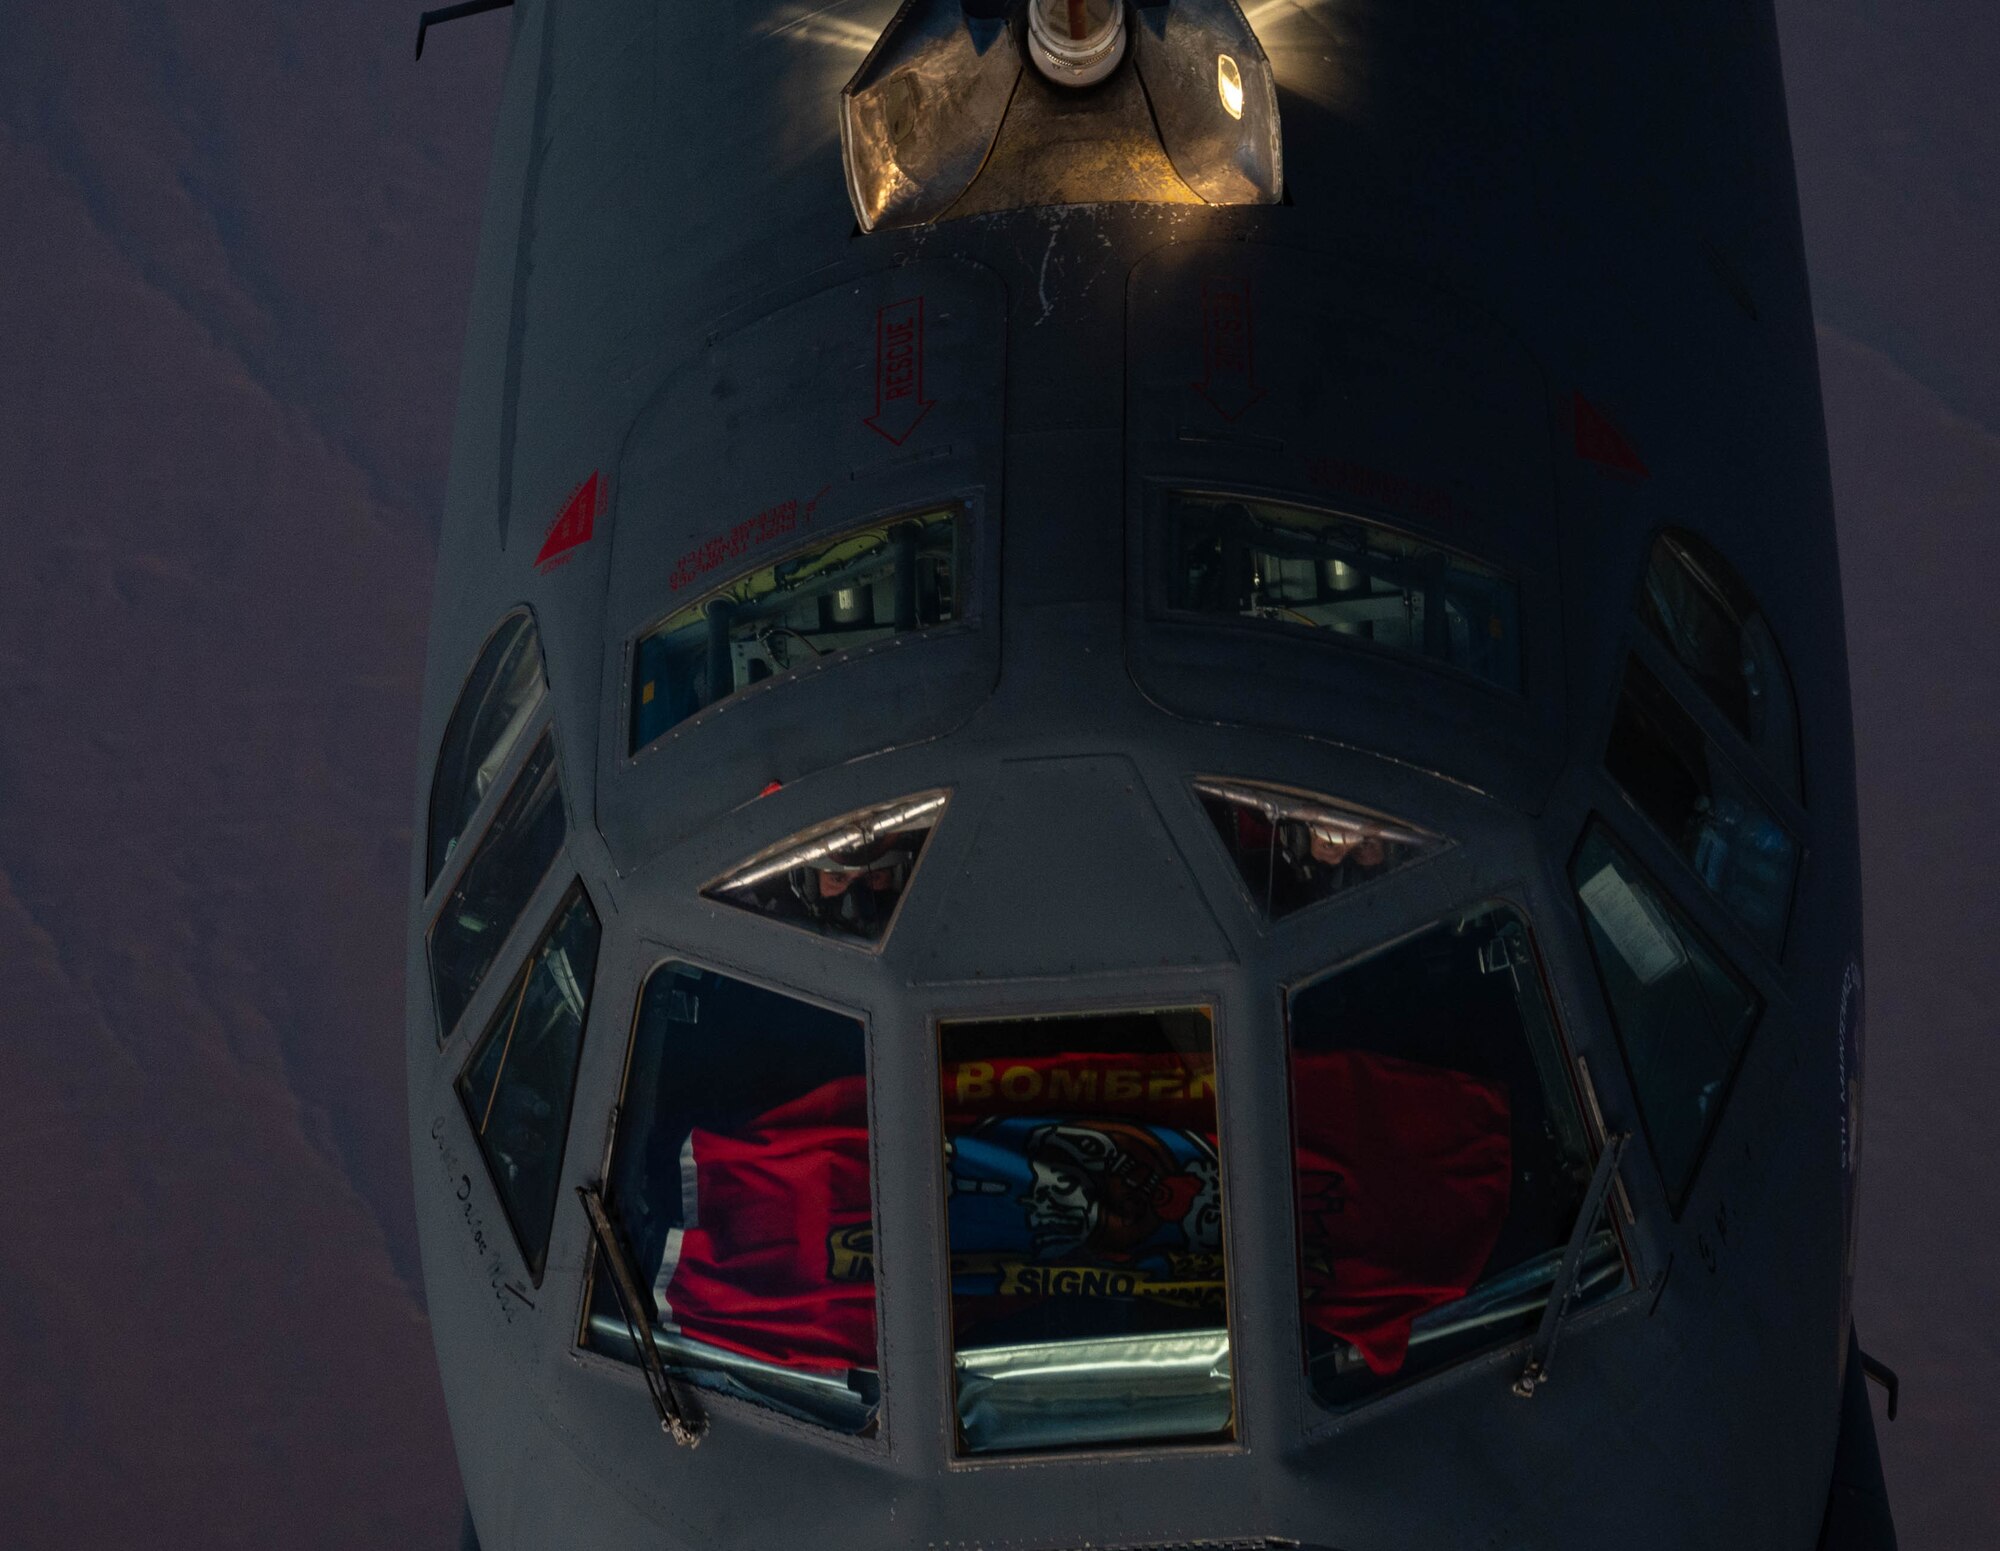 A U.S. Air Force B-52H Stratofortress, assigned to the 5th Bomb Wing, Minot Air Force Base, North Dakota, conducts aerial refueling with a KC-135 Stratotanker assigned to the 340th Expeditionary Air Refueling Squadron, Al Udeid Air Base, Qatar, during a Bomber Task Force mission, over the U.S. Central Command area of responsibility, Sept. 4, 2022. During the BTF, two B-52H Stratofortresses, along with other U.S. aircraft, conducted theater integration training with a variety of coalition and partner ally aircraft to demonstrate readiness and strengthen ties within the USCENTCOM AOR. (U.S. Air Force photo by Staff Sgt. Dana Tourtellotte)